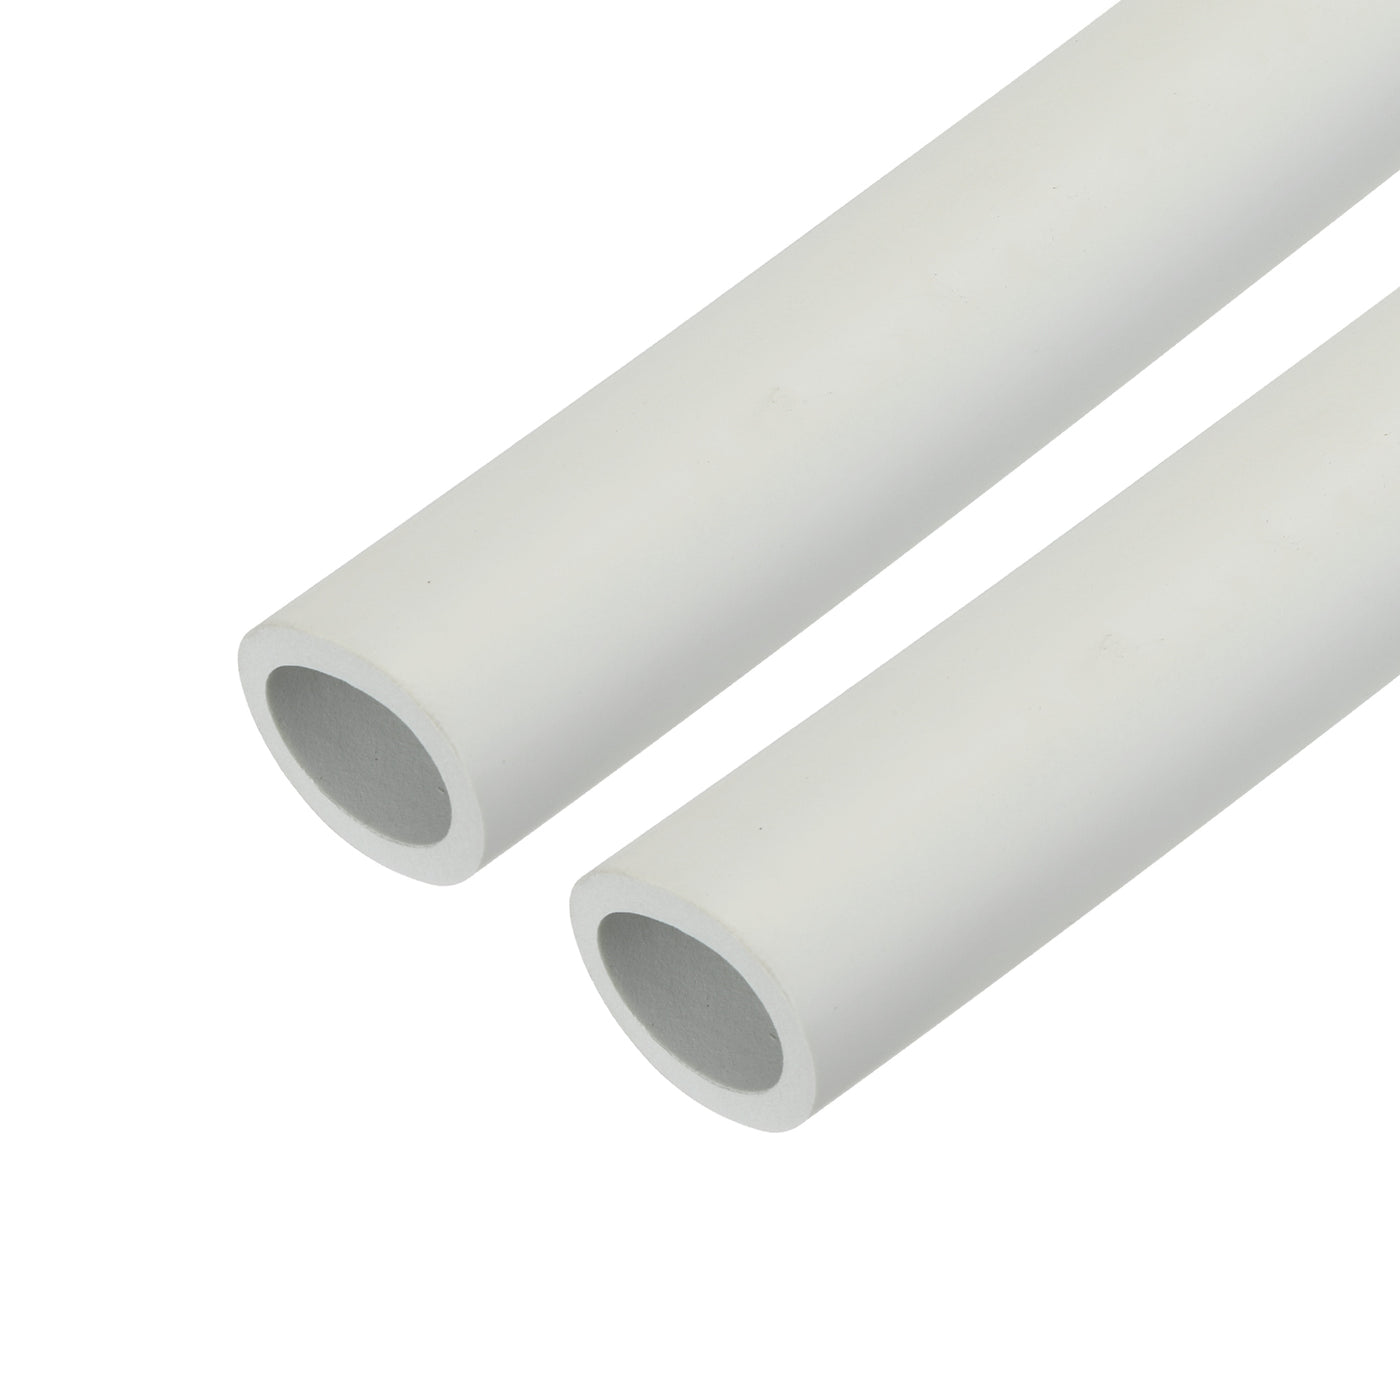 uxcell Uxcell 2pcs 3.3ft Pipe Insulation Tube 1 1/4 Inch(32mm) ID 44mm OD Foam Tubing for Handle Grip Support, White